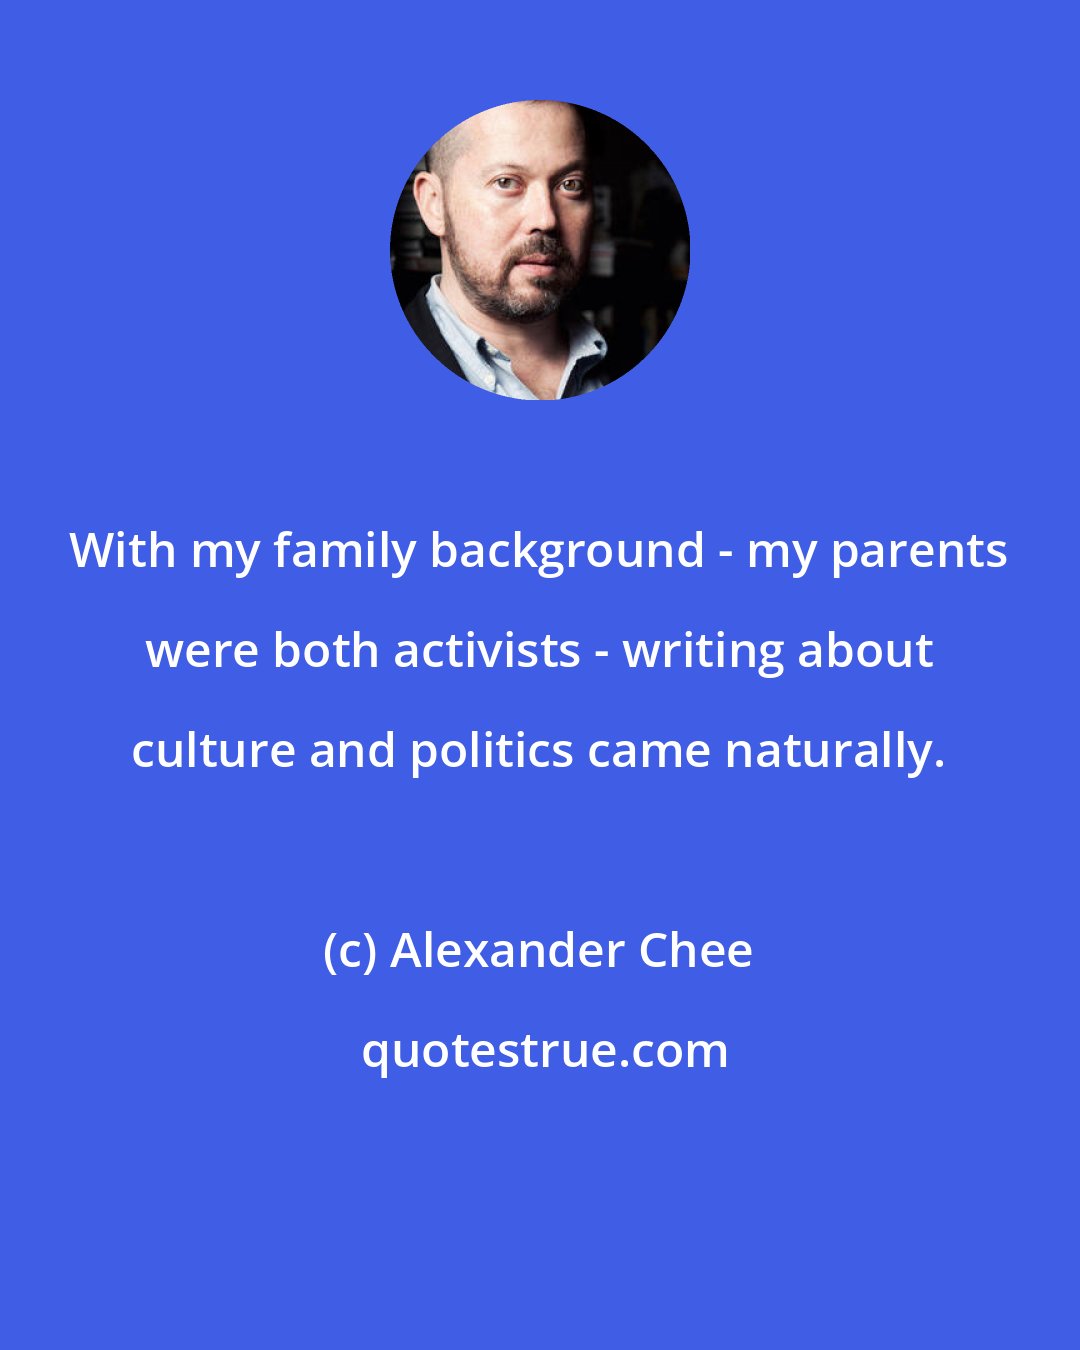 Alexander Chee: With my family background - my parents were both activists - writing about culture and politics came naturally.